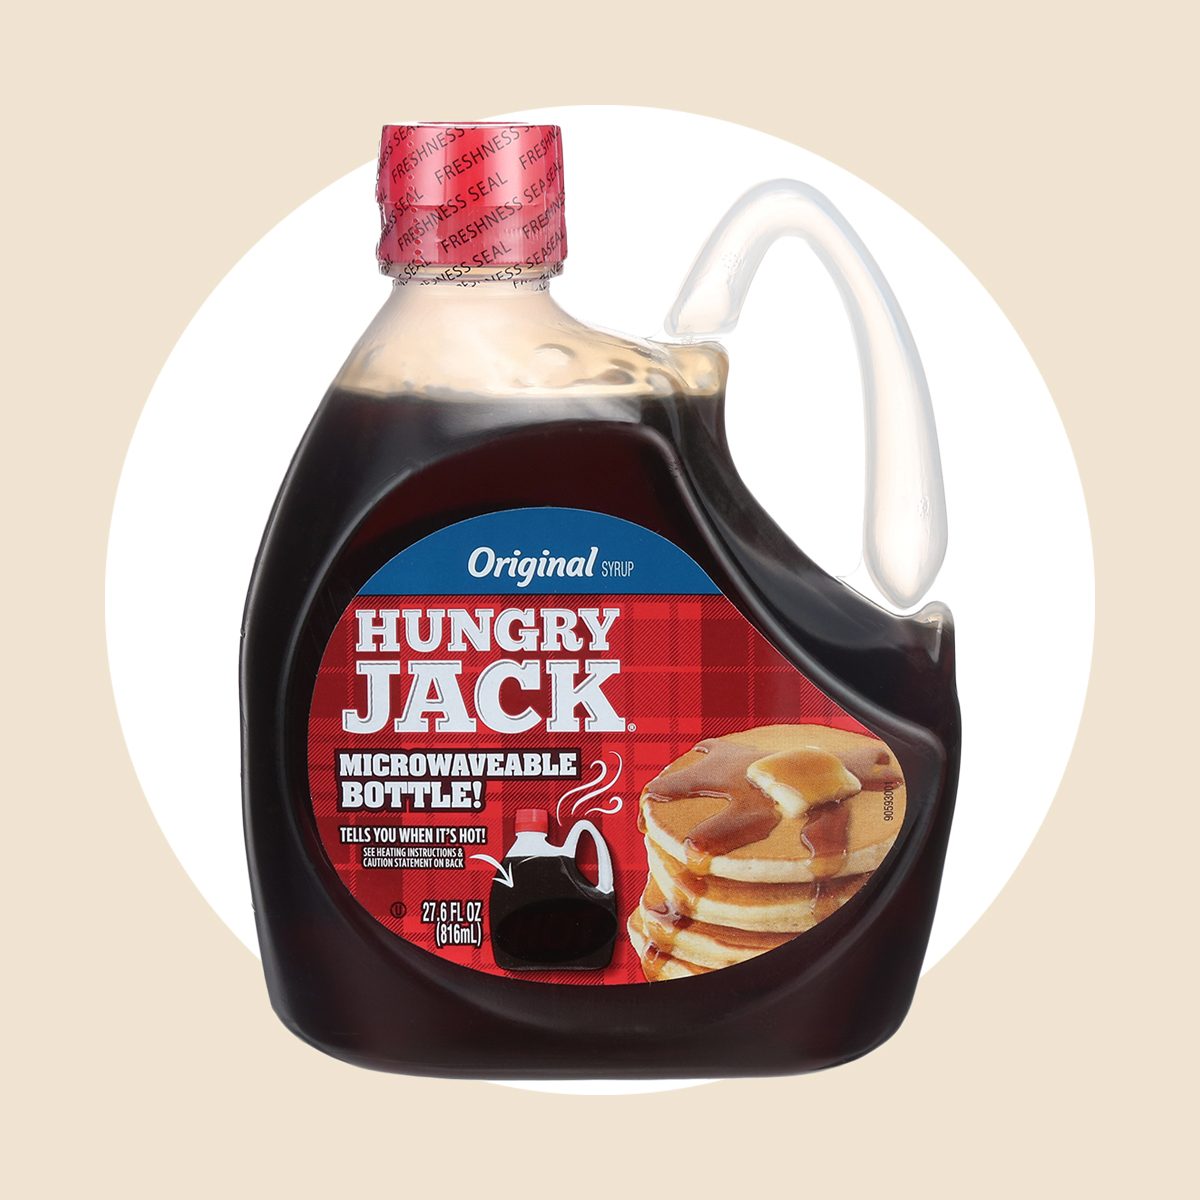 The Best Maple Syrup You Can Buy, According to Kitchen Experts